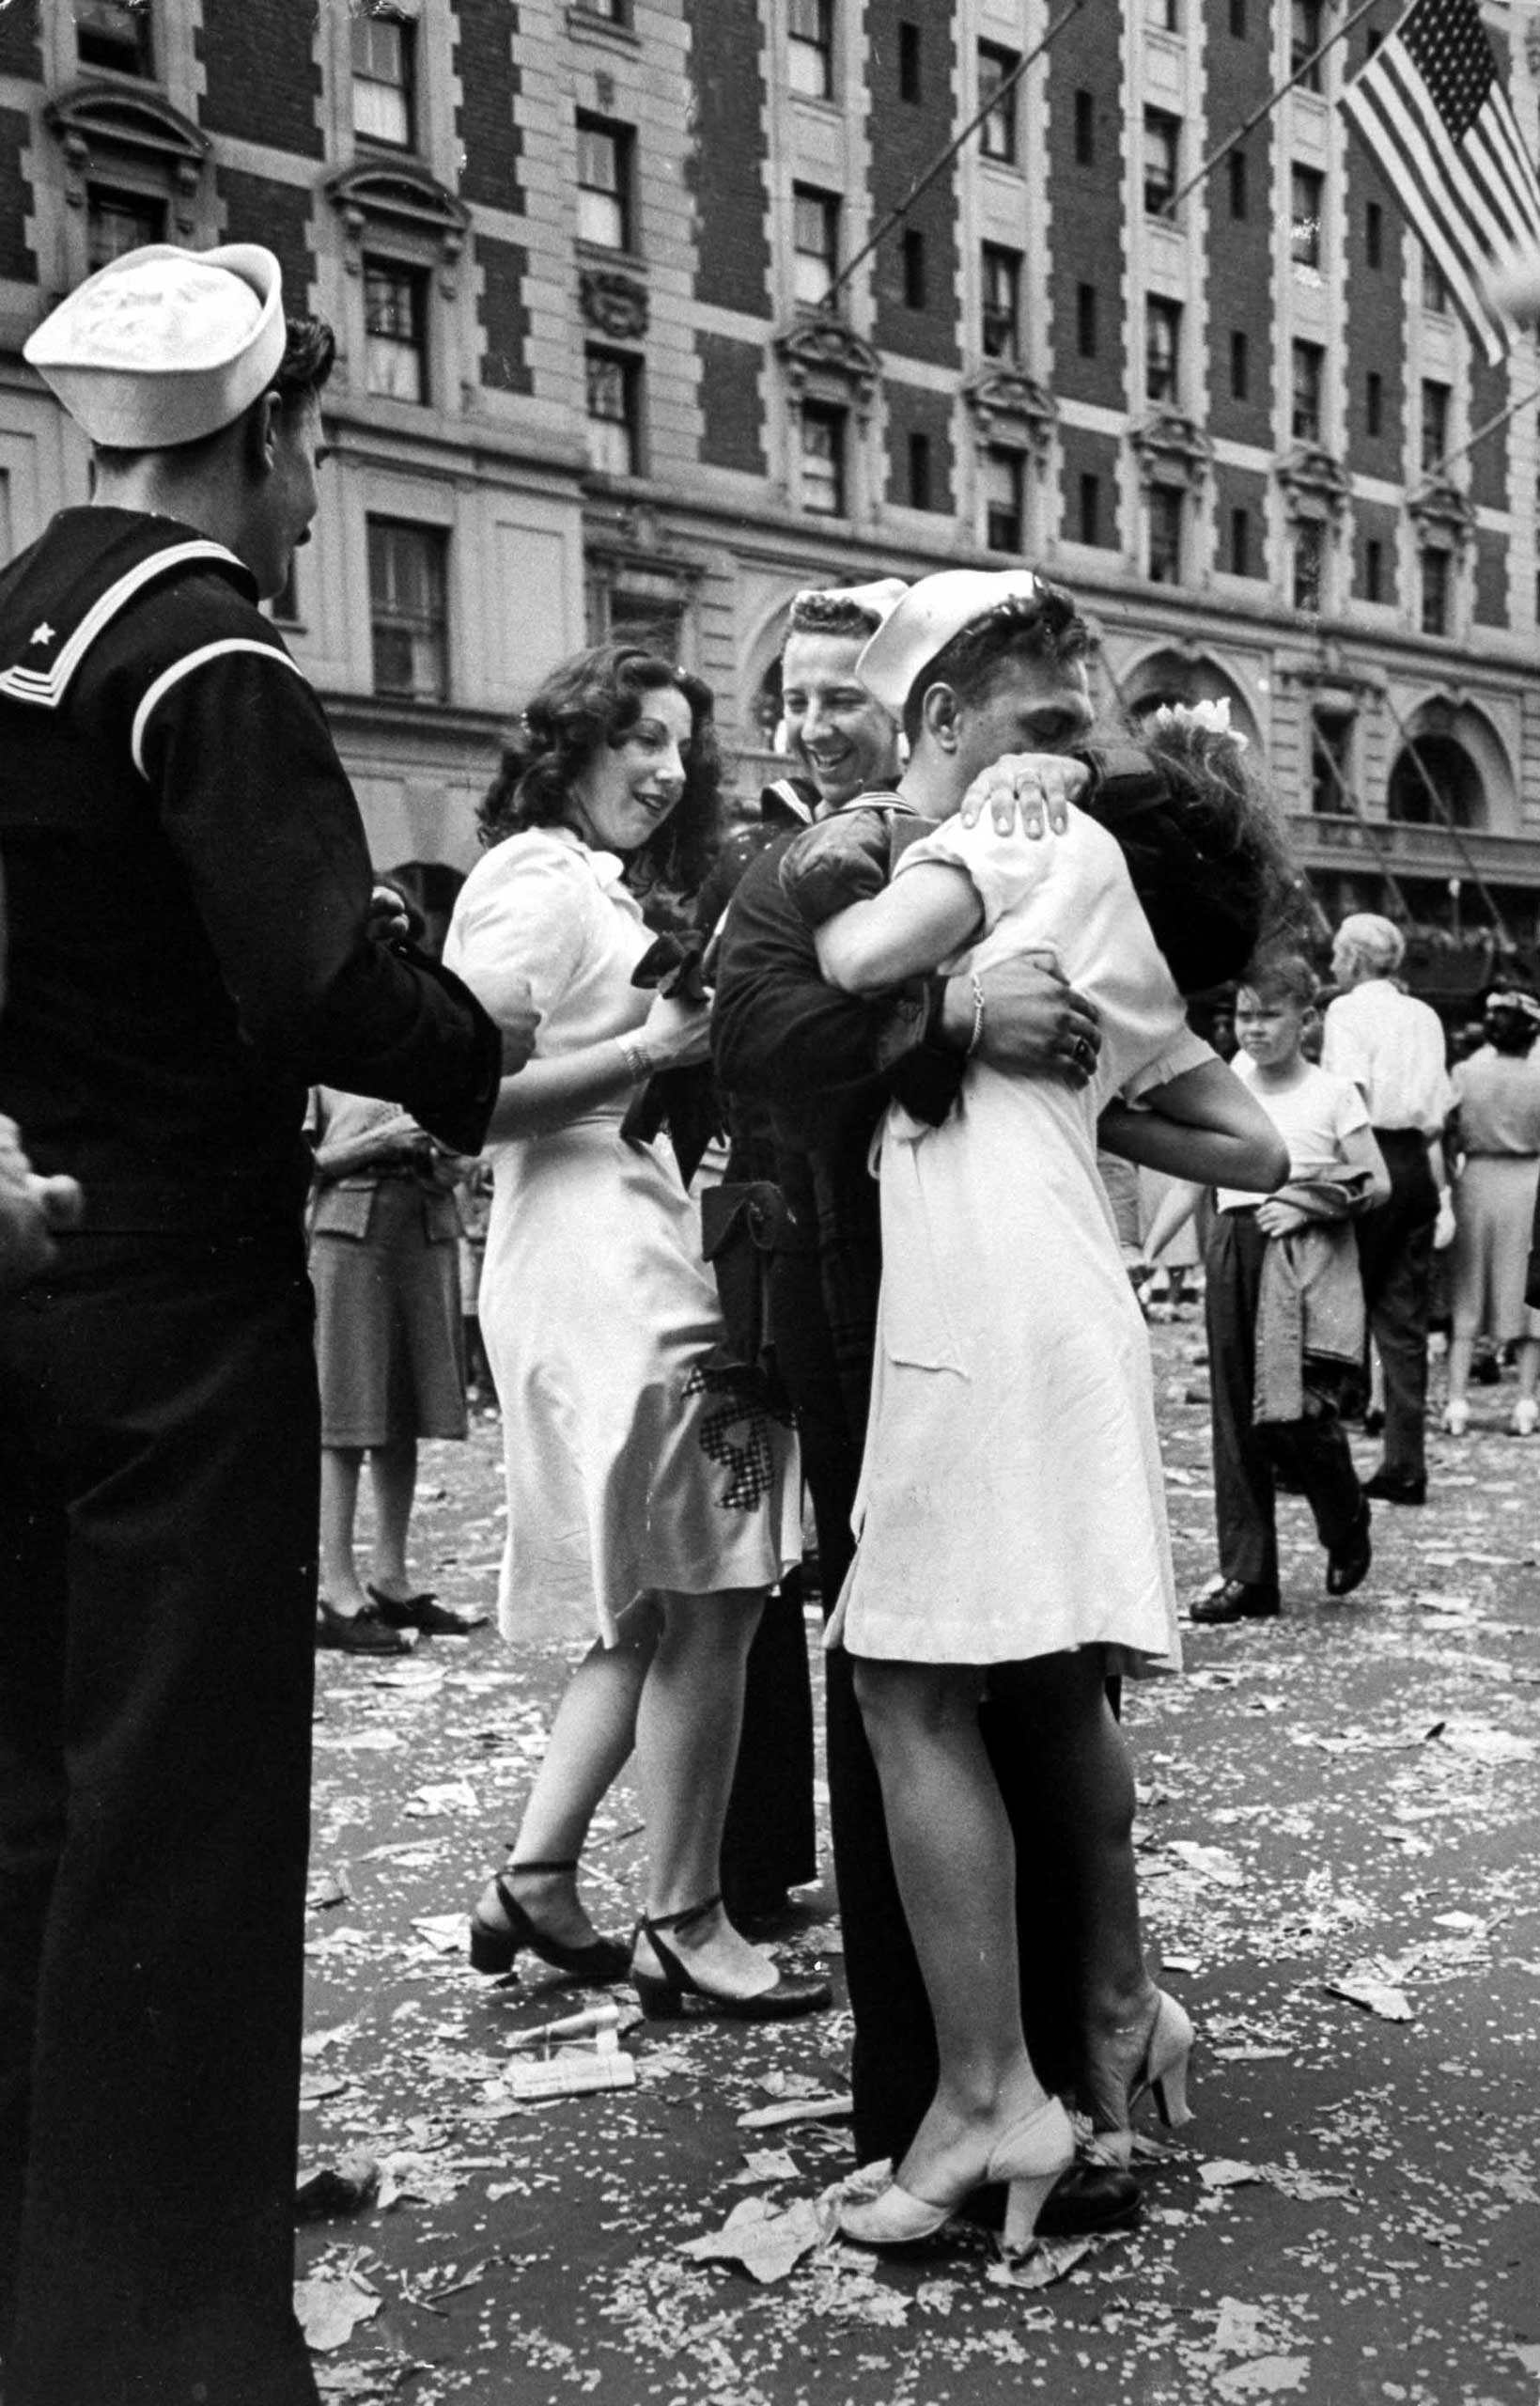 Not published in LIFE. V-J Day in New York City, August 14, 1945.